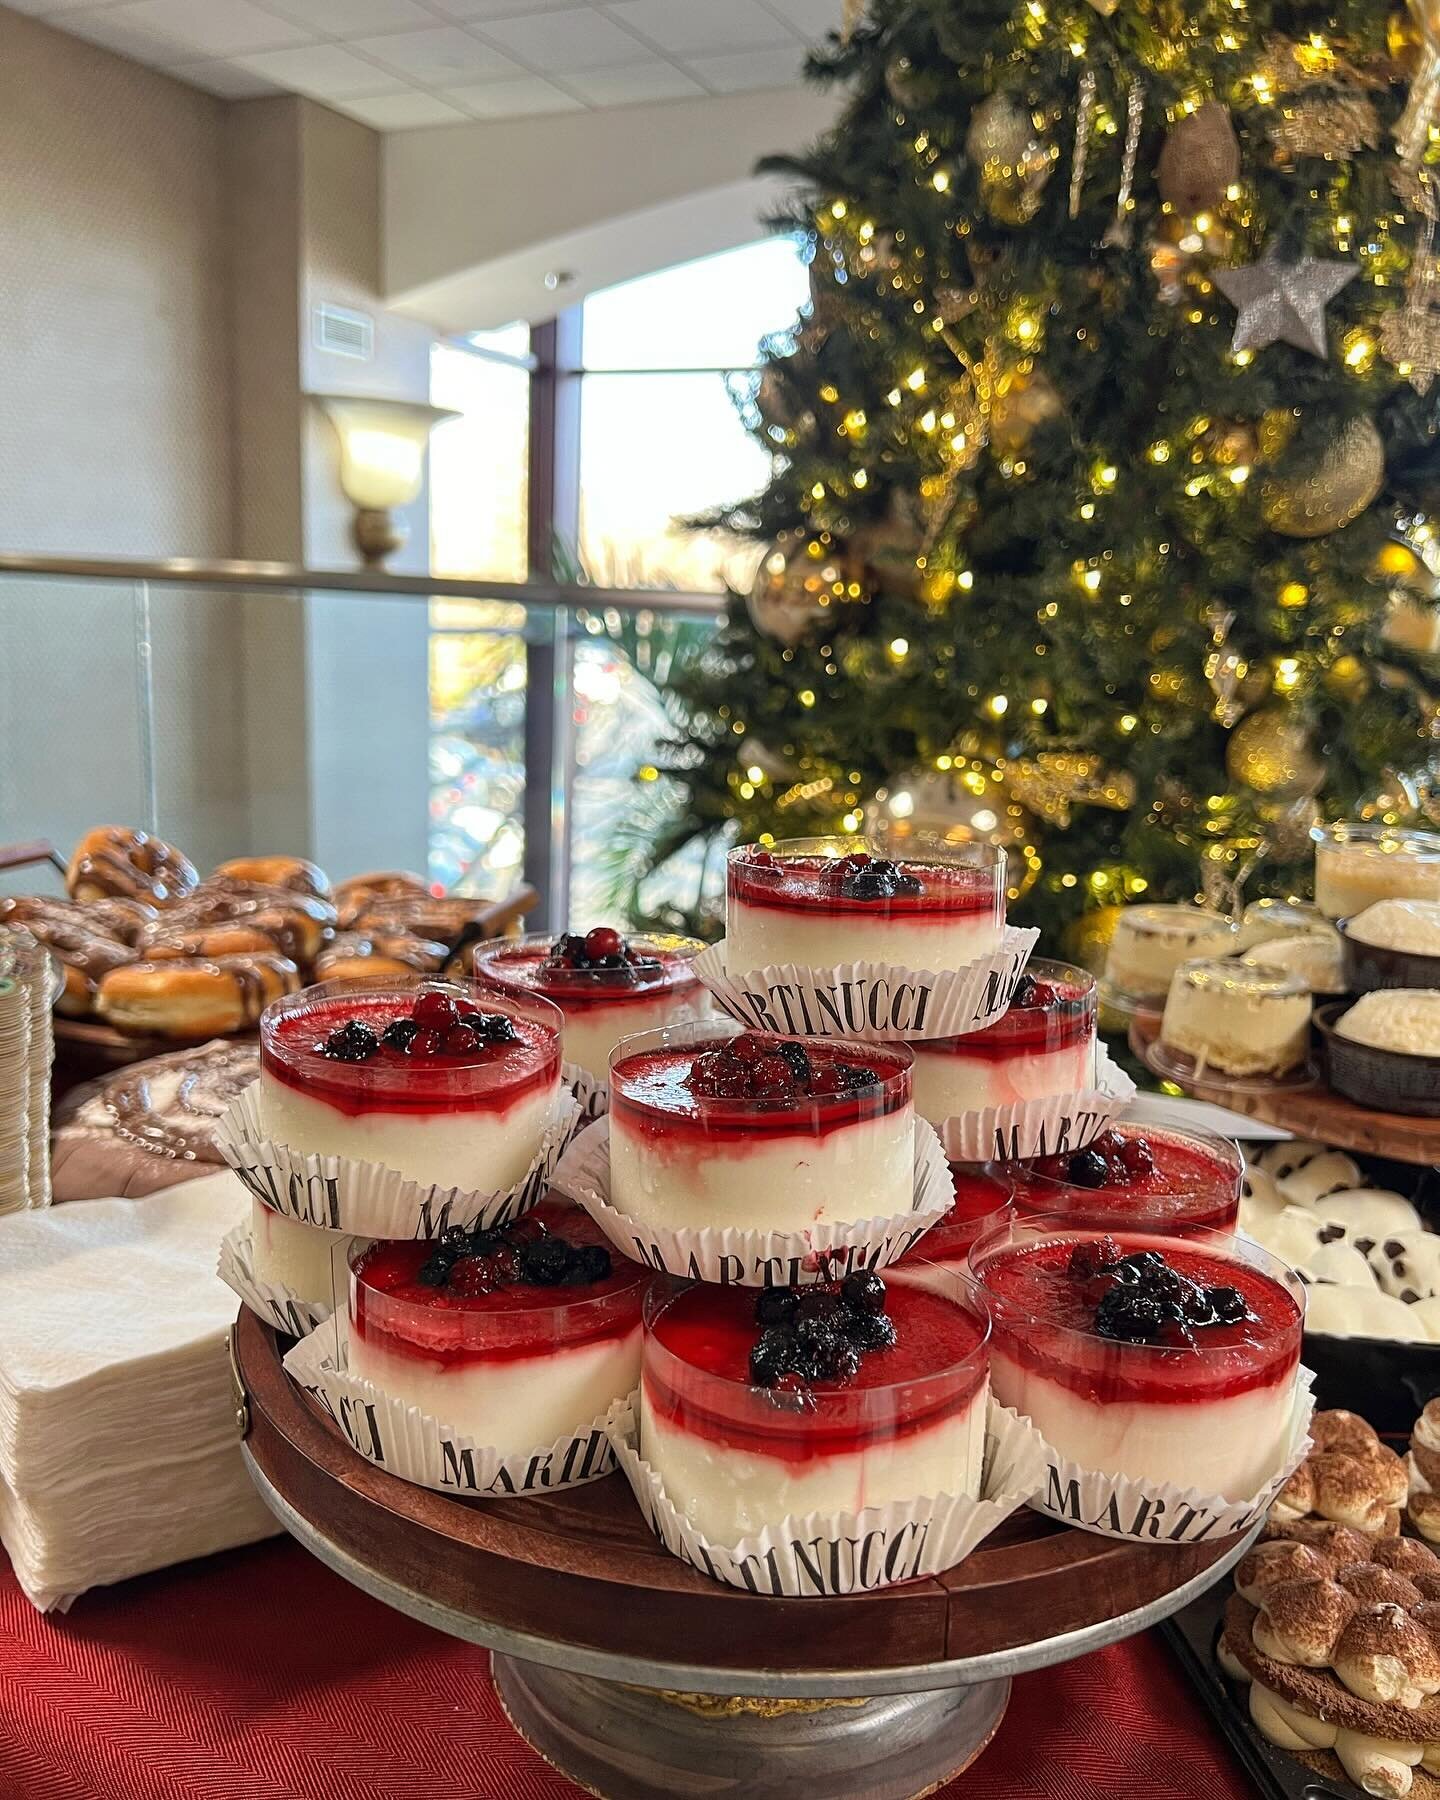 Thank you @krasdale for choosing us again to cater your annual Christmas party. #desserttable #italiandesserts #italianafoods #cateringservice #nataleisc&omicron;ming